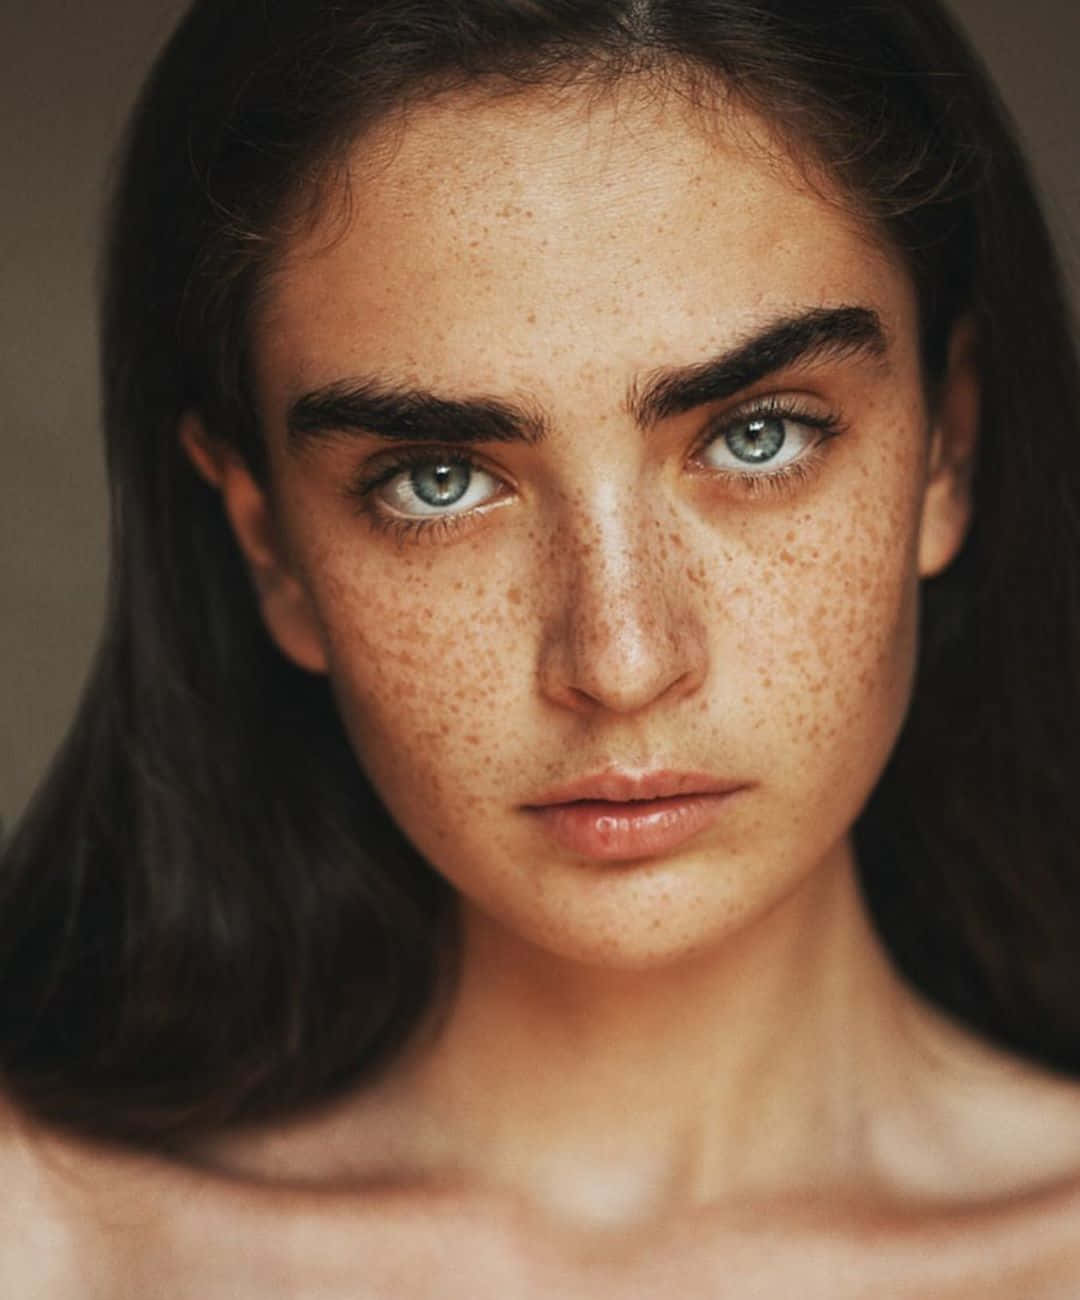 Portrait Picture Lady With Freckles